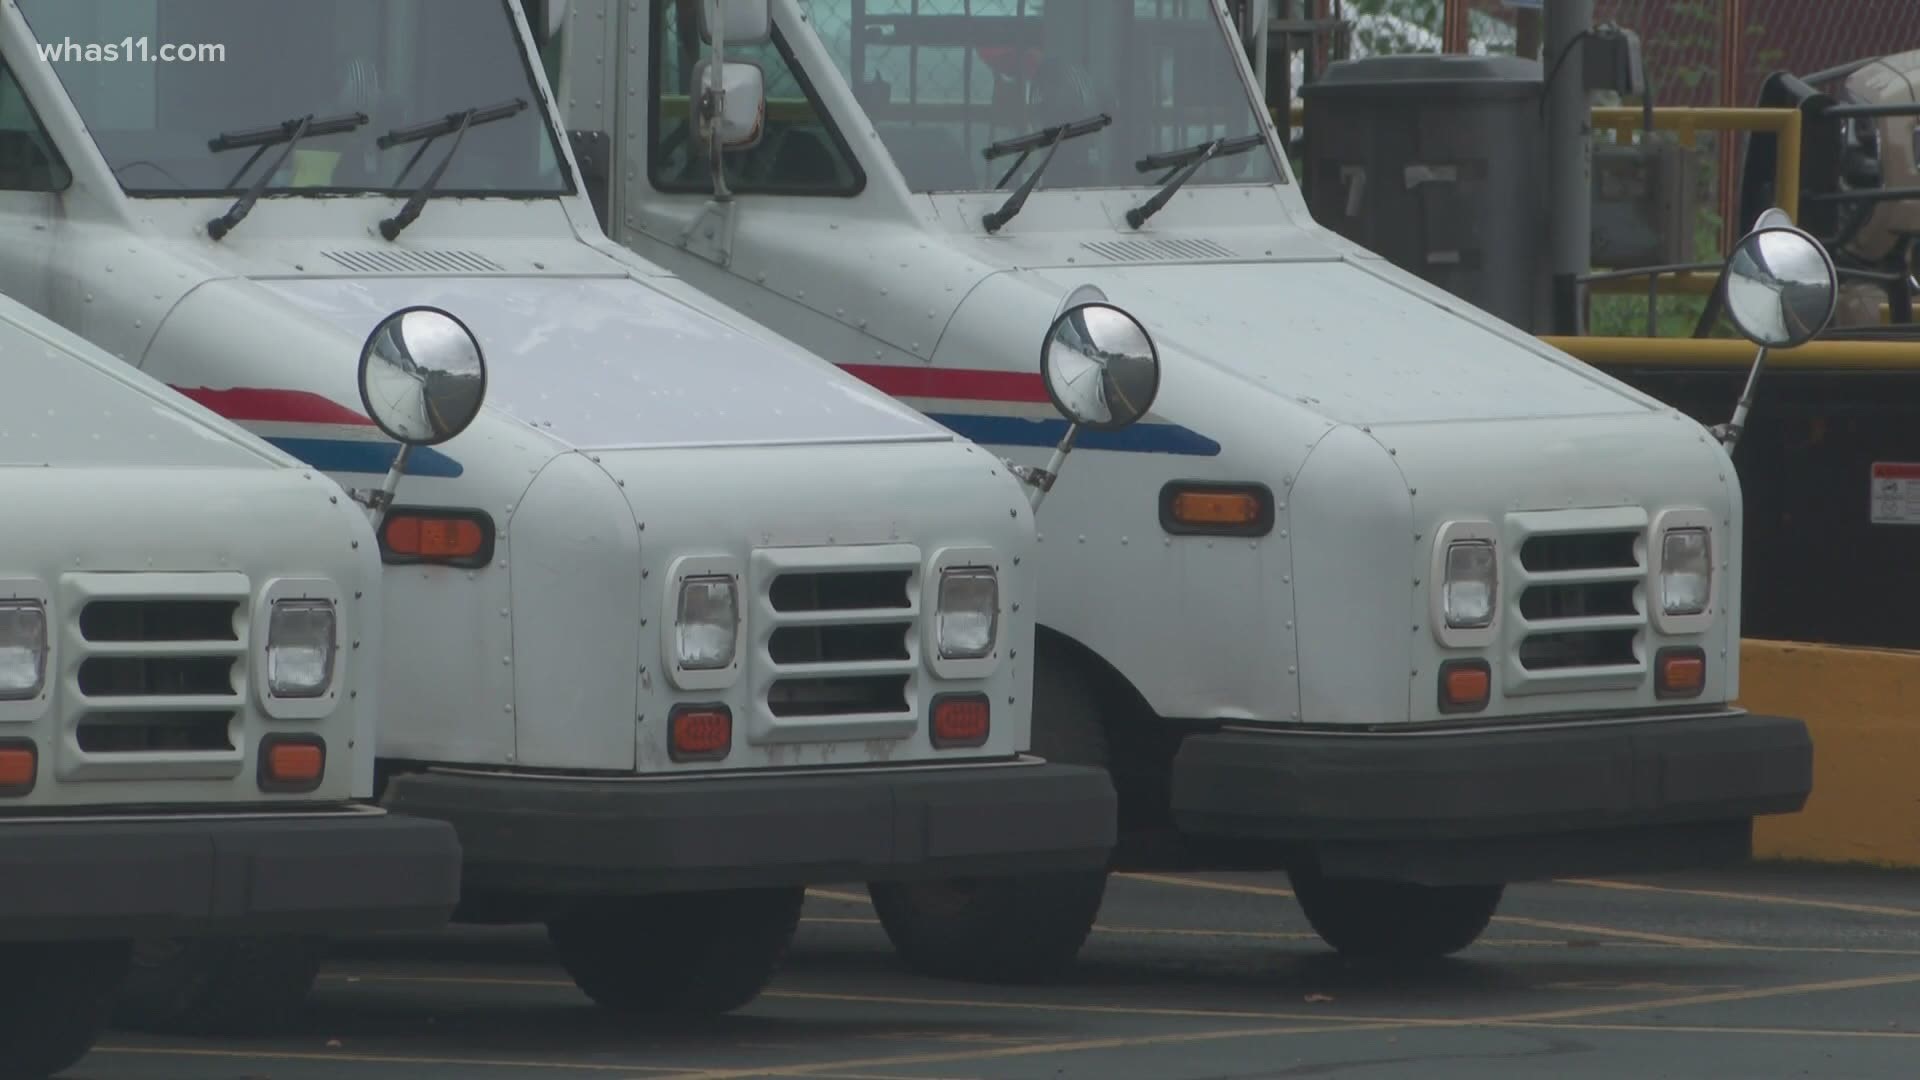 Stories of delayed deliveries from the United States Postal Service are echoed across Kentuckiana.